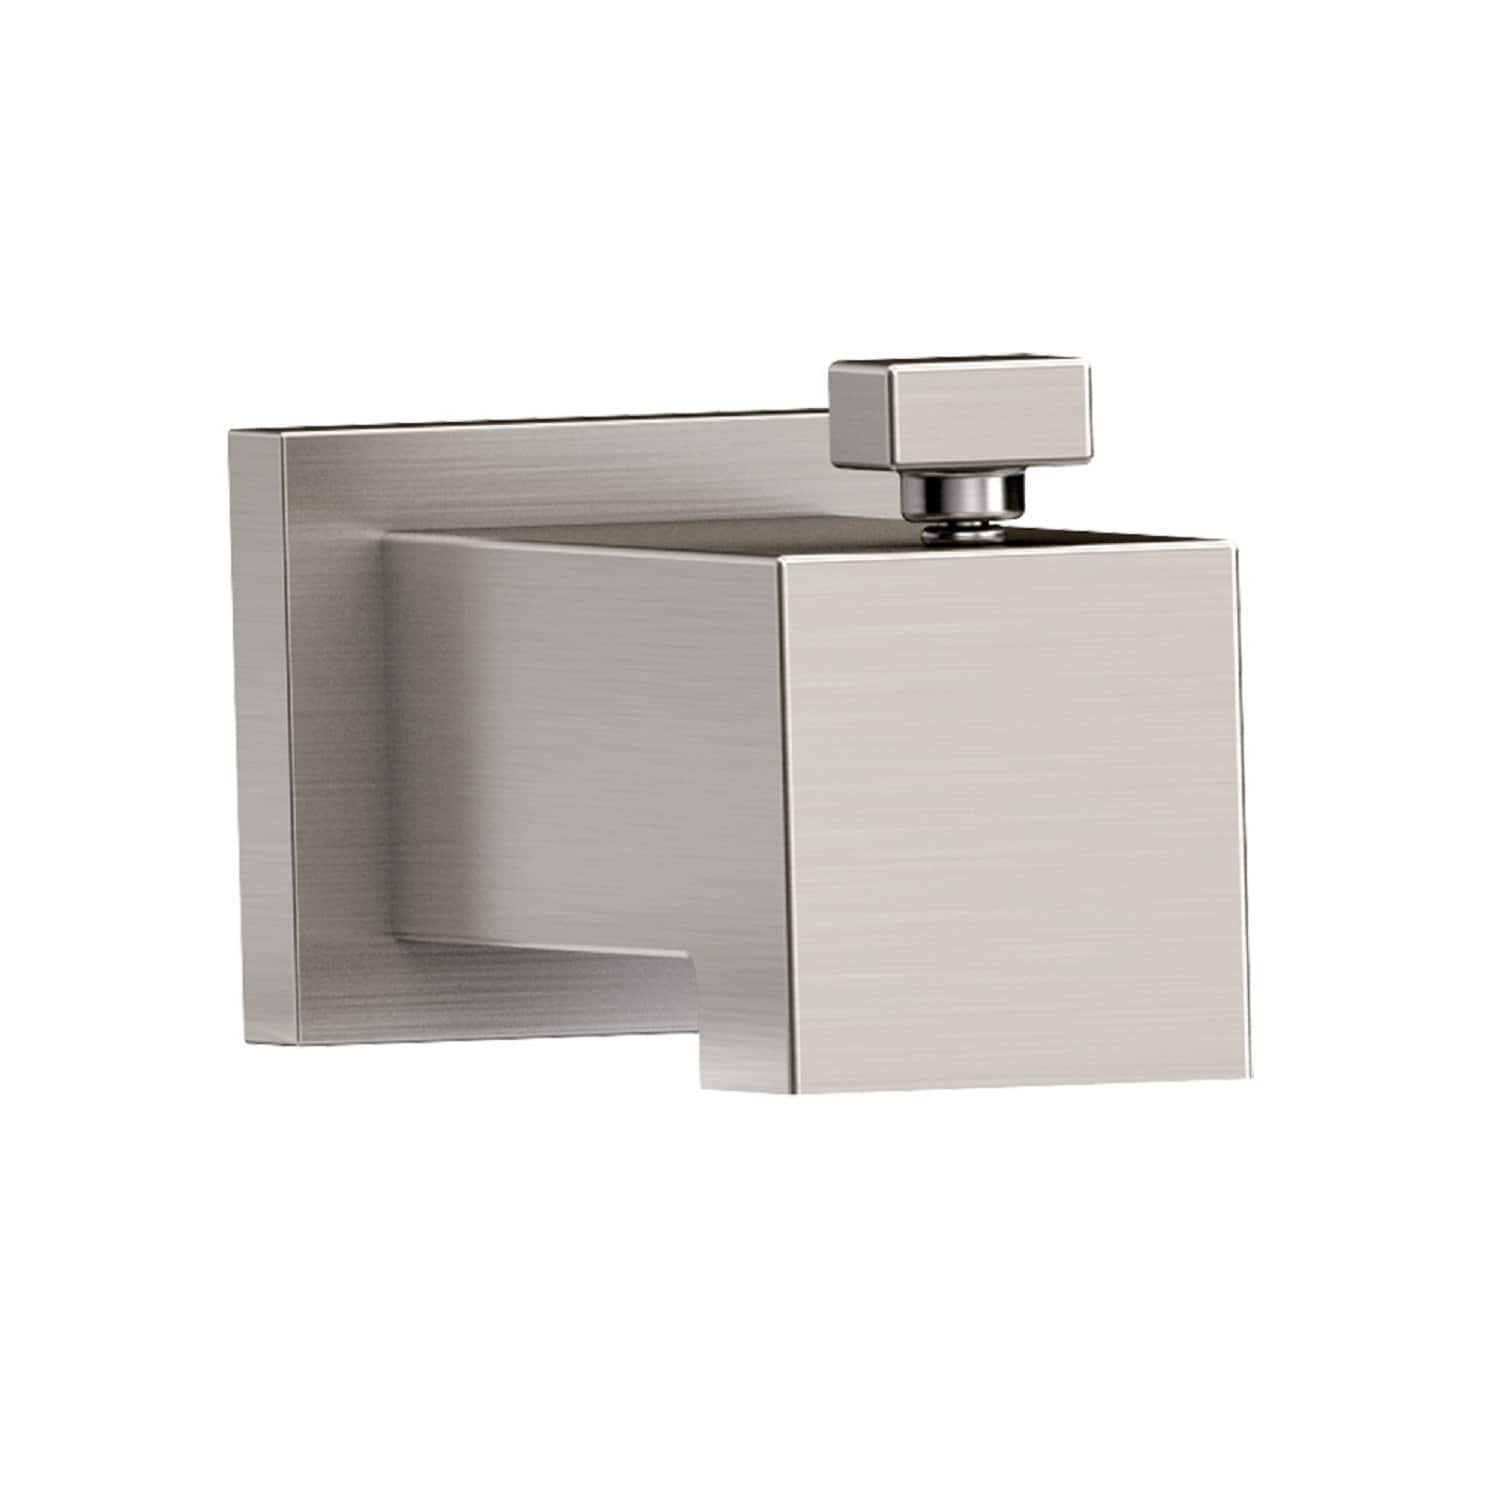 Tub Spout with Diverter - Brushed Nickel. Universal Fit